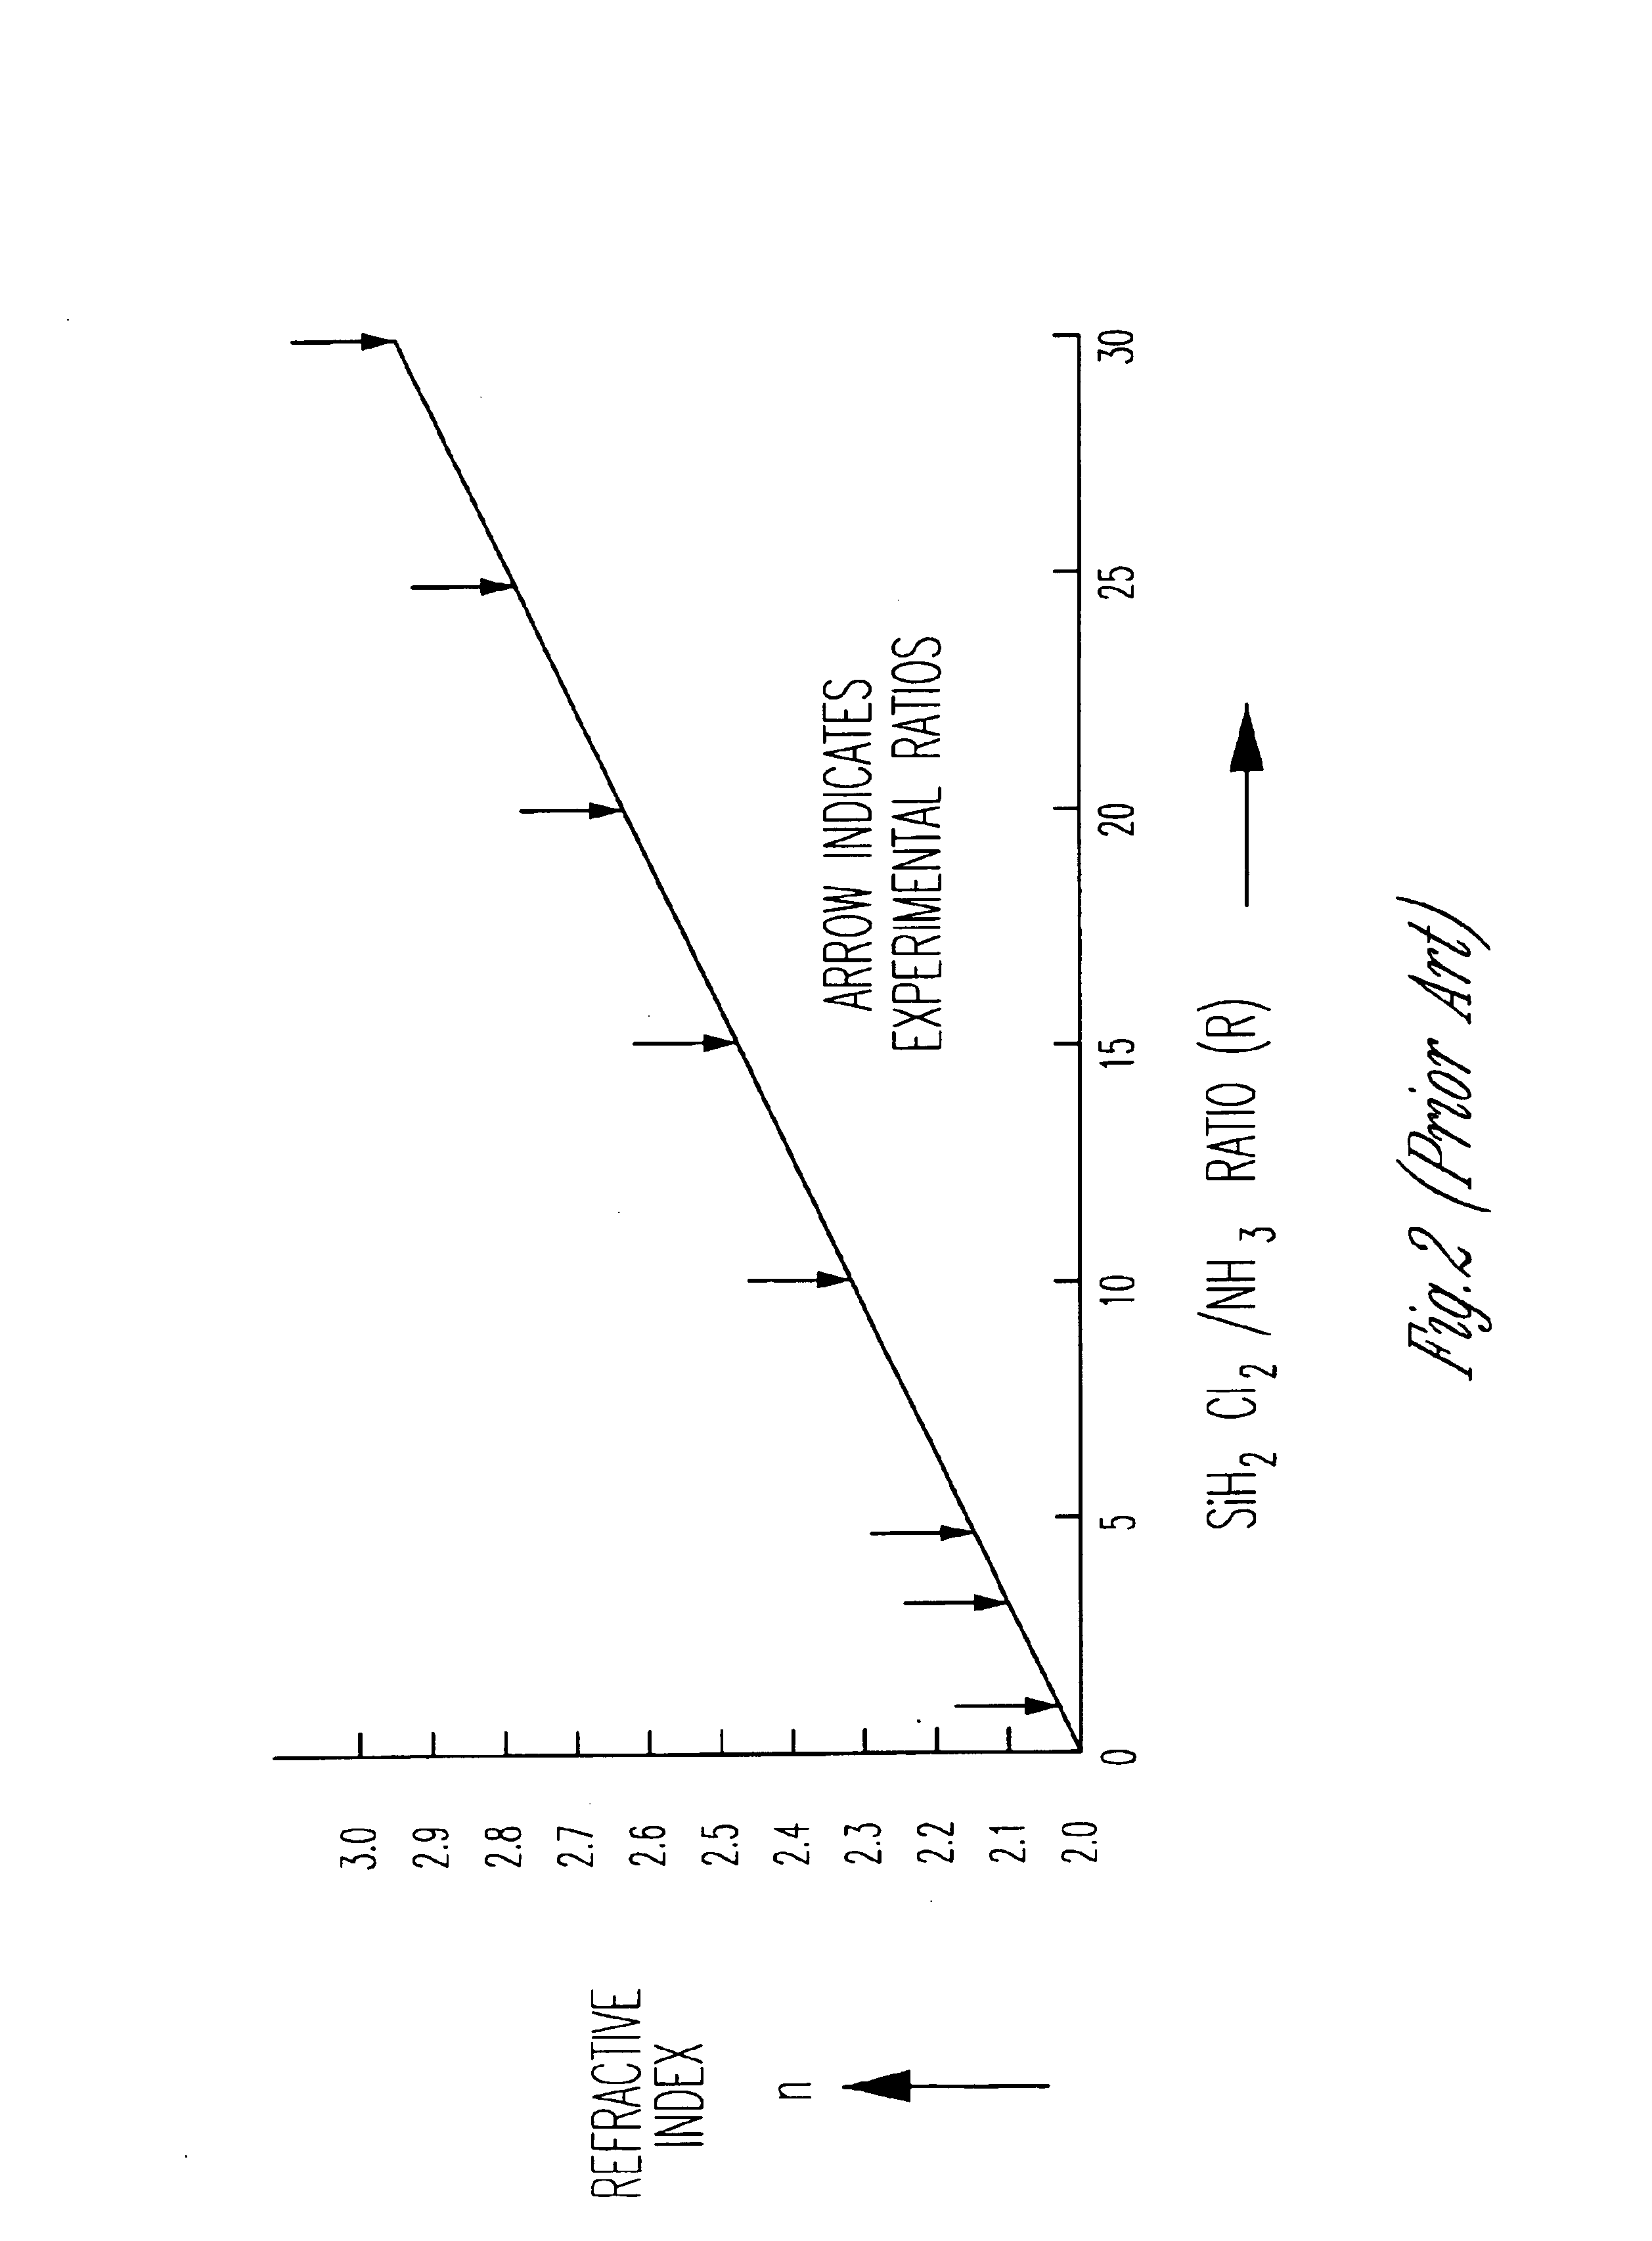 Scalable high performance antifuse structure and process